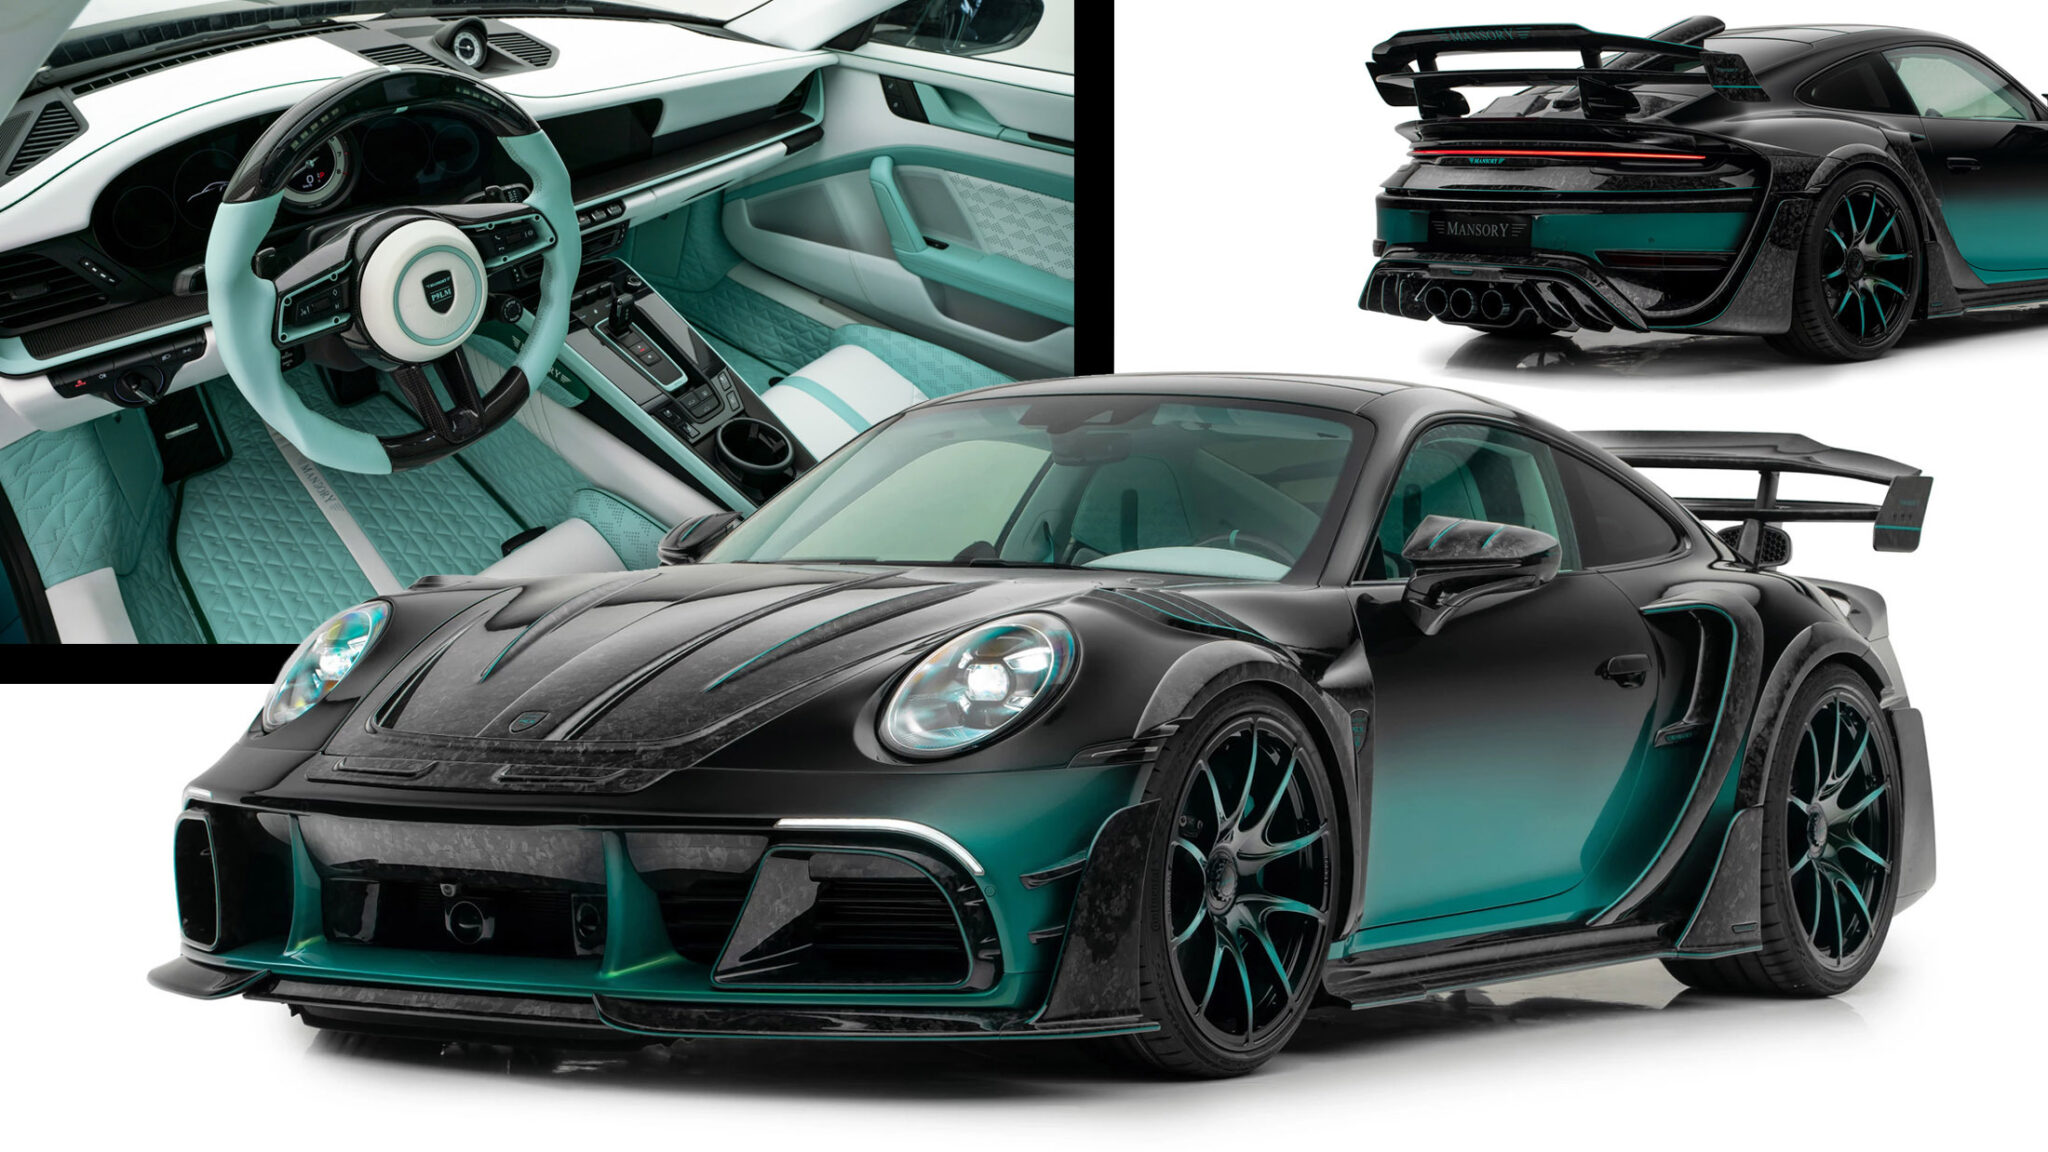 Mansory’s Wild Porsche 911 Turbo S Has 900 HP And Carbon Armor